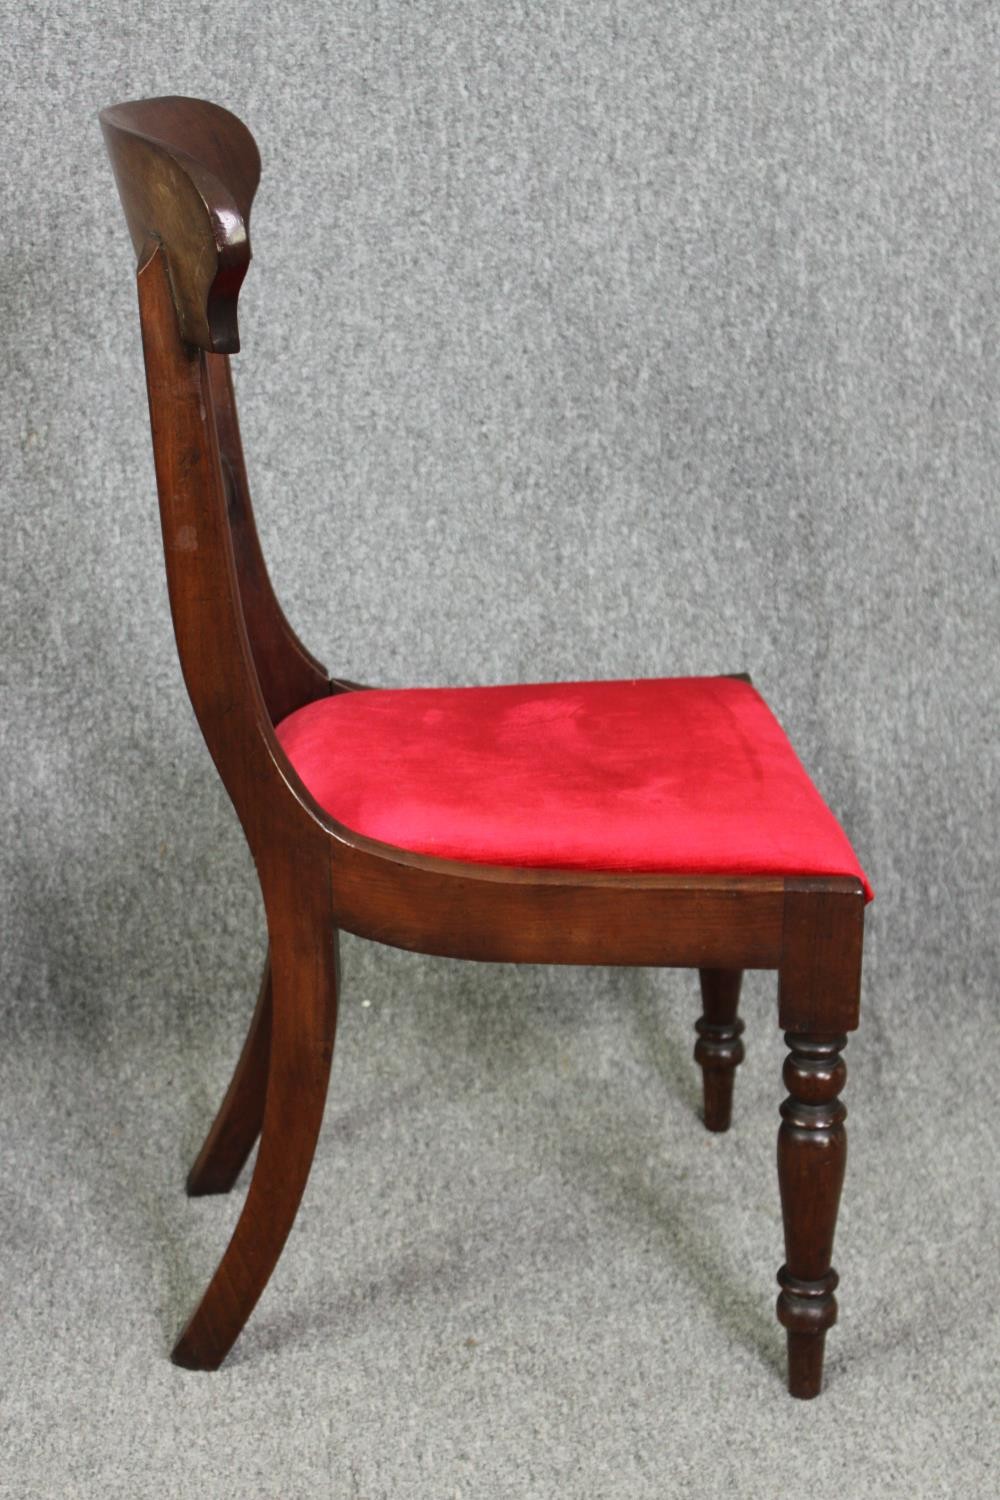 Dining chairs, a pair, mid 19th century mahogany. - Image 4 of 7